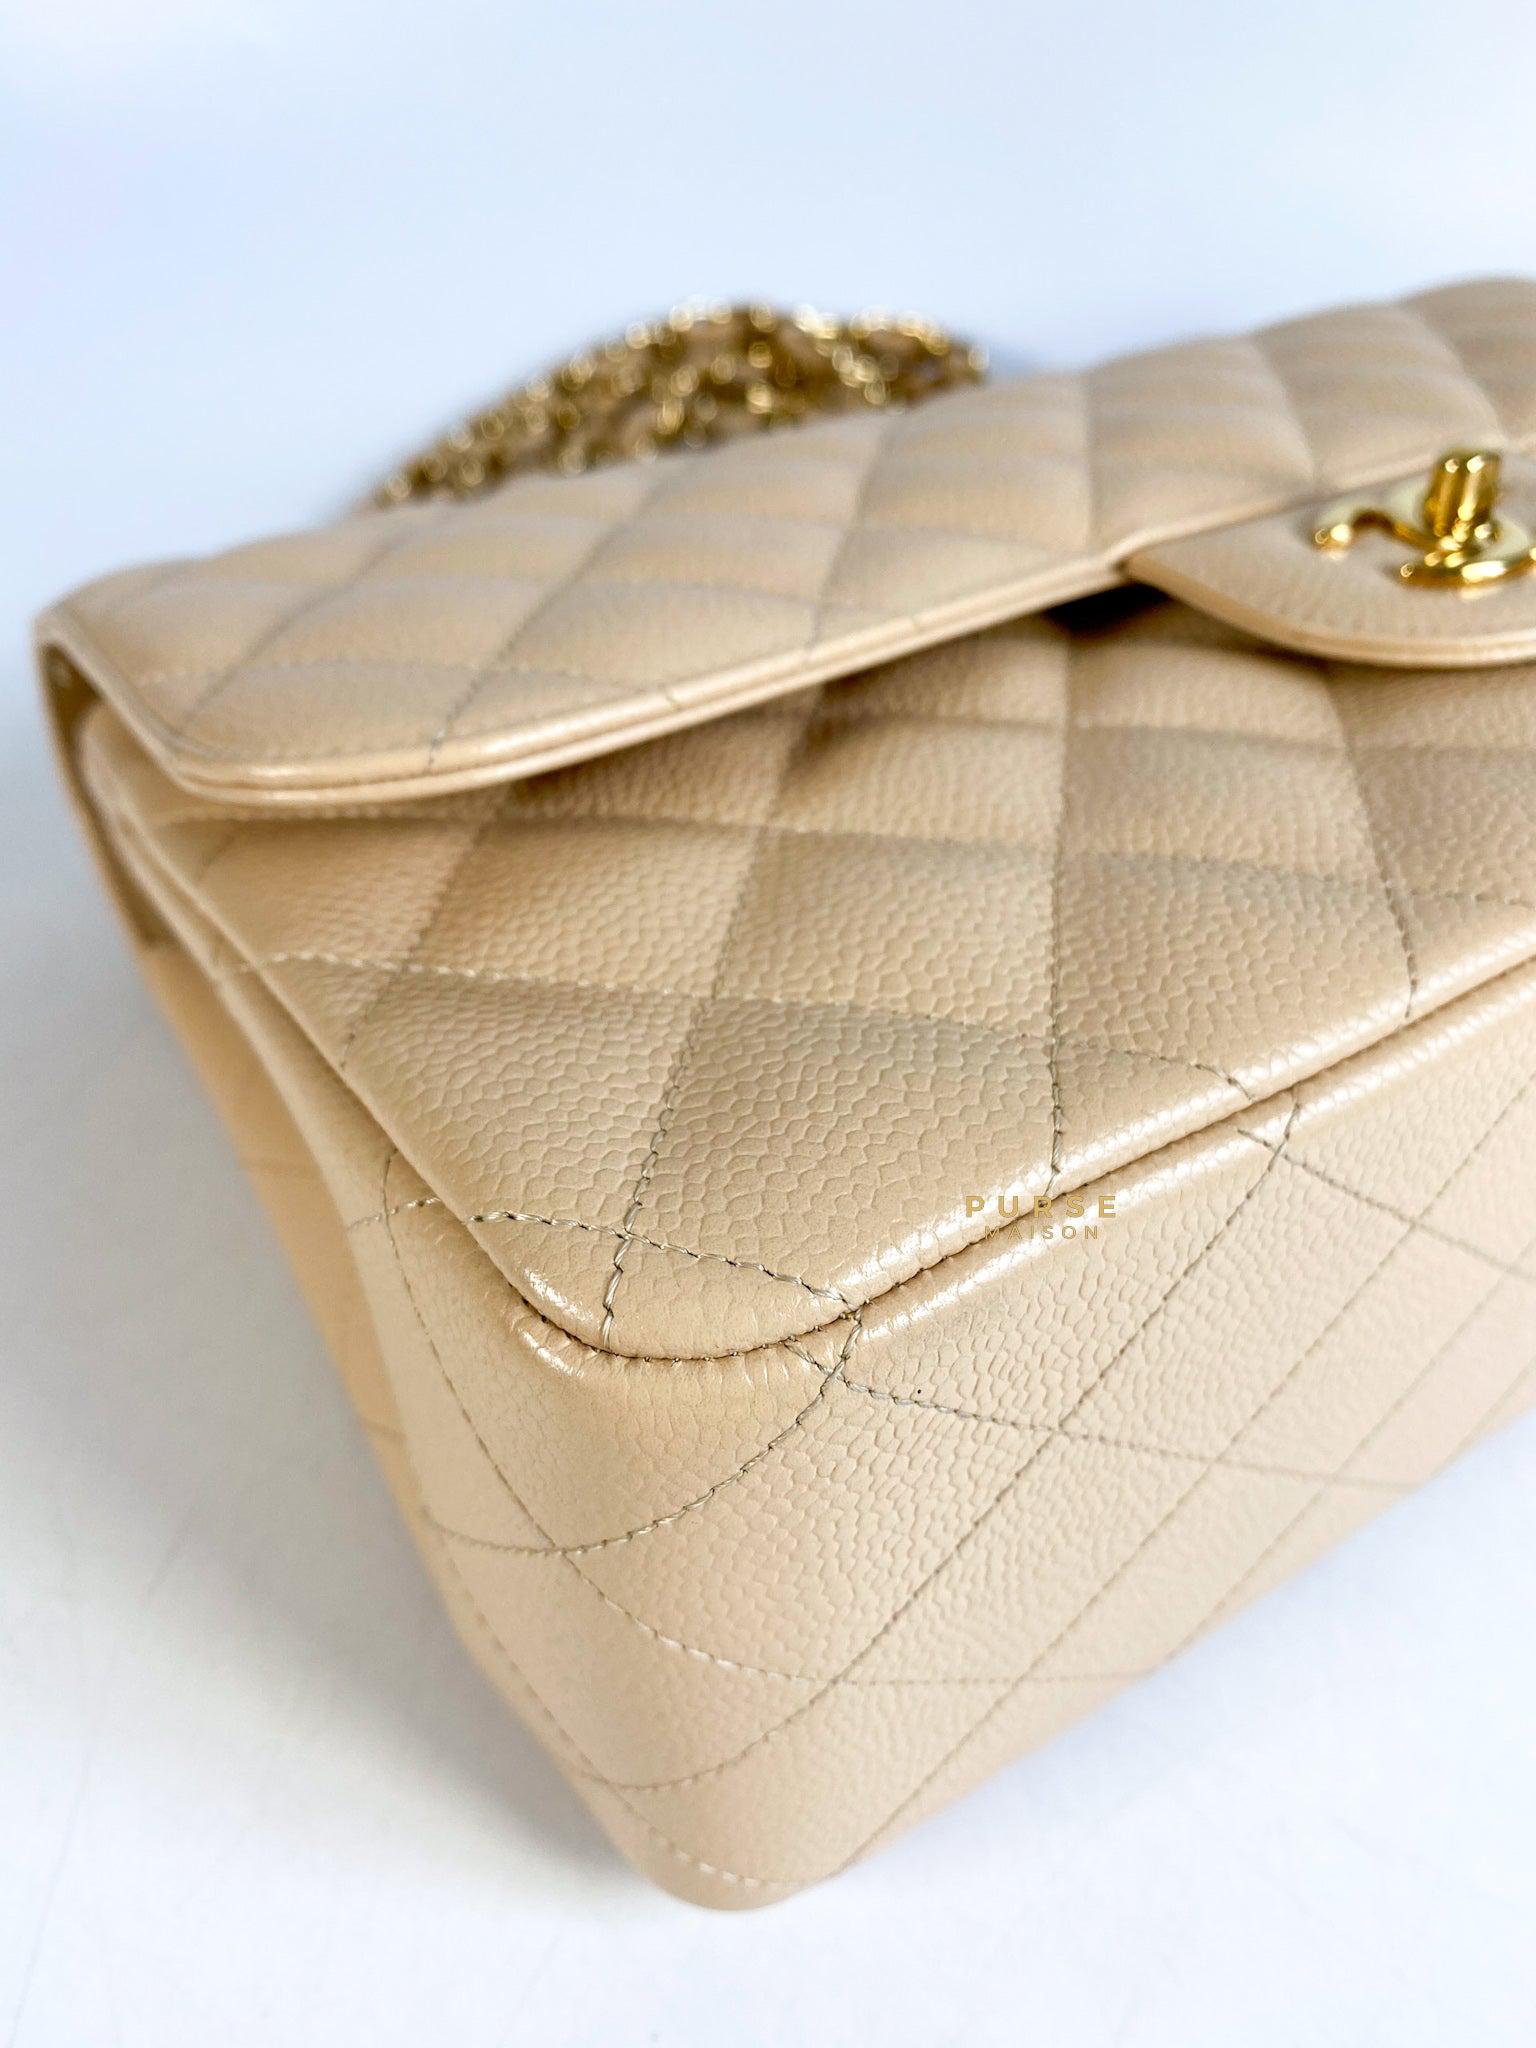 Chanel Classic Double Flap Jumbo in Beige Clair Quilted Caviar and Gold Hardware (Series 14)